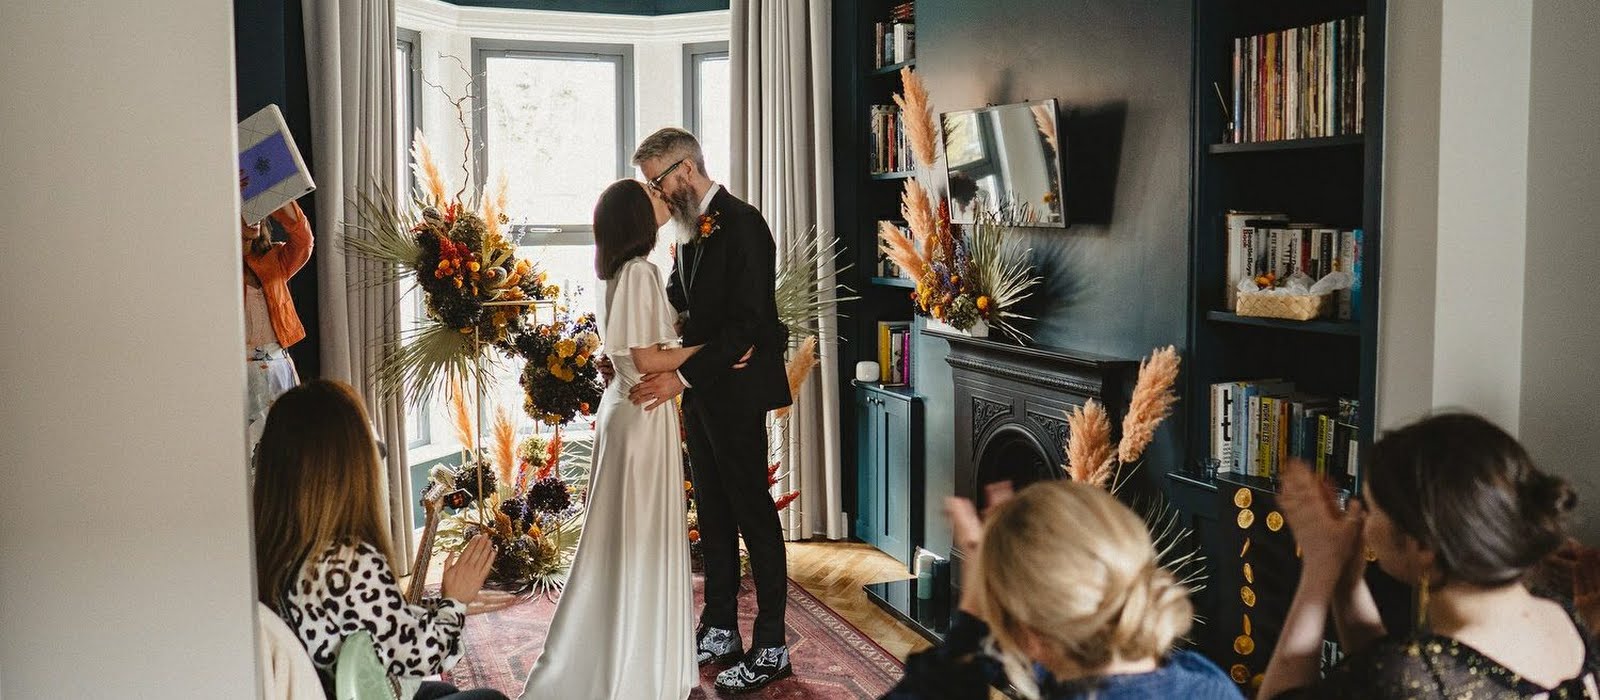 Real Weddings: Chris and Kathryn’s at-home wedding in Belfast